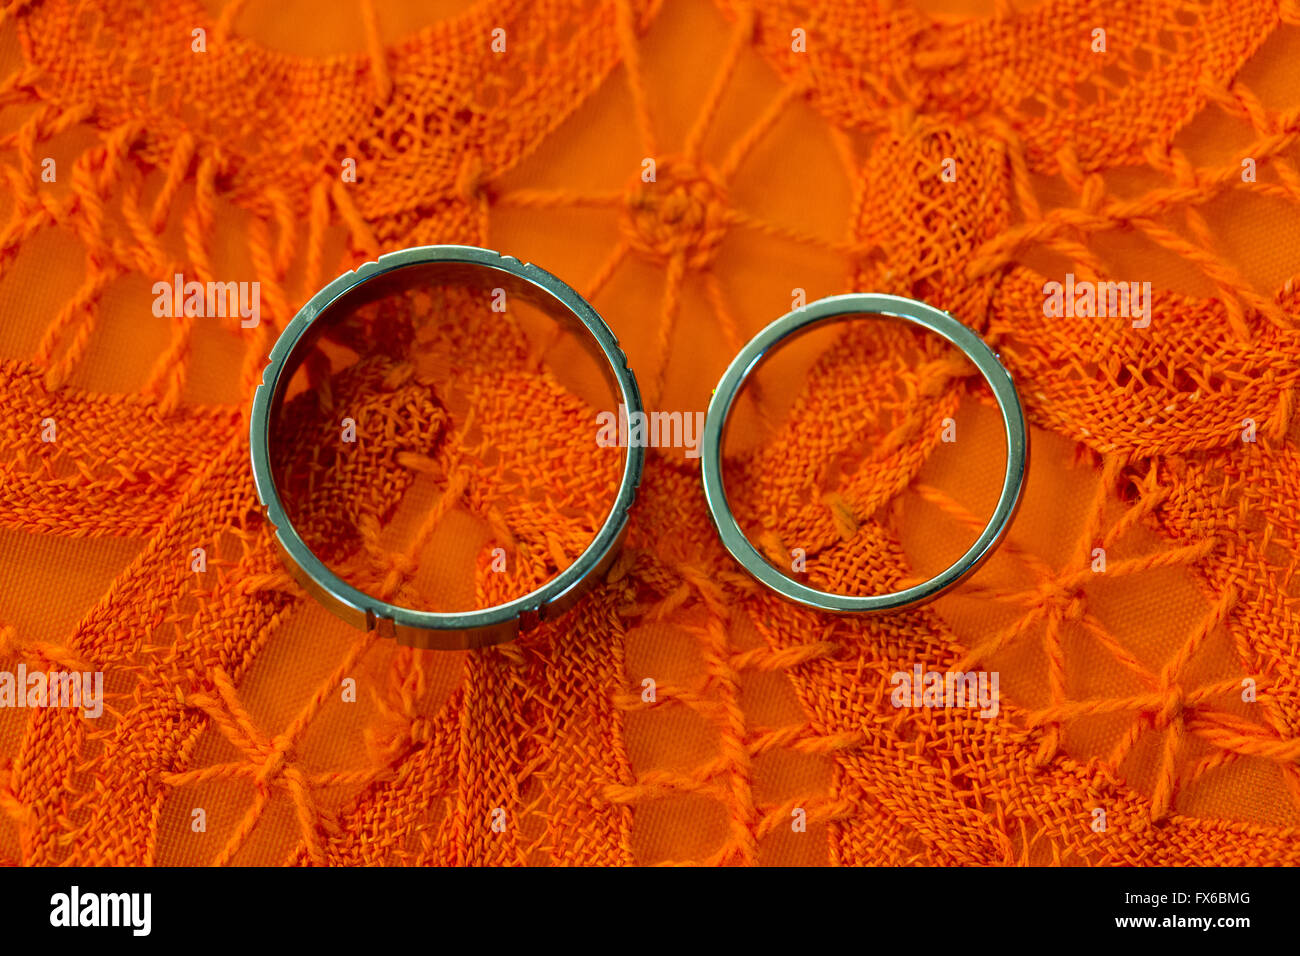 Bride and groom wedding rings photographed before the ceremony on an orange tablecloth. Stock Photo